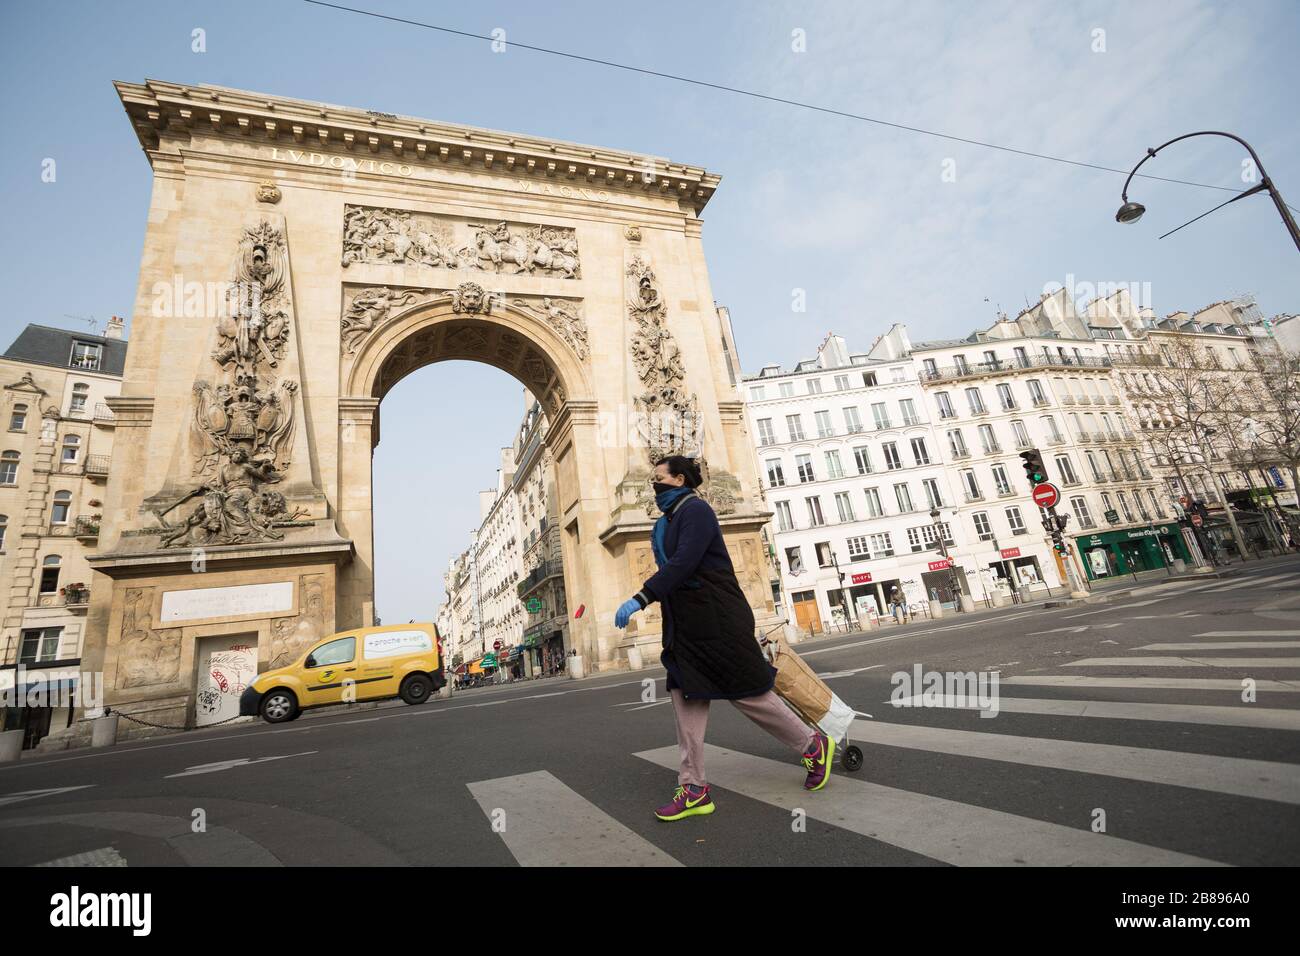 Paris, France. 20th Mar, 2020. A woman walks by a desolate Porte  Saint-Denis arch during the afternoon of March 20, 2020. Paris has been on  lockdown since Tuesday to curb the spread